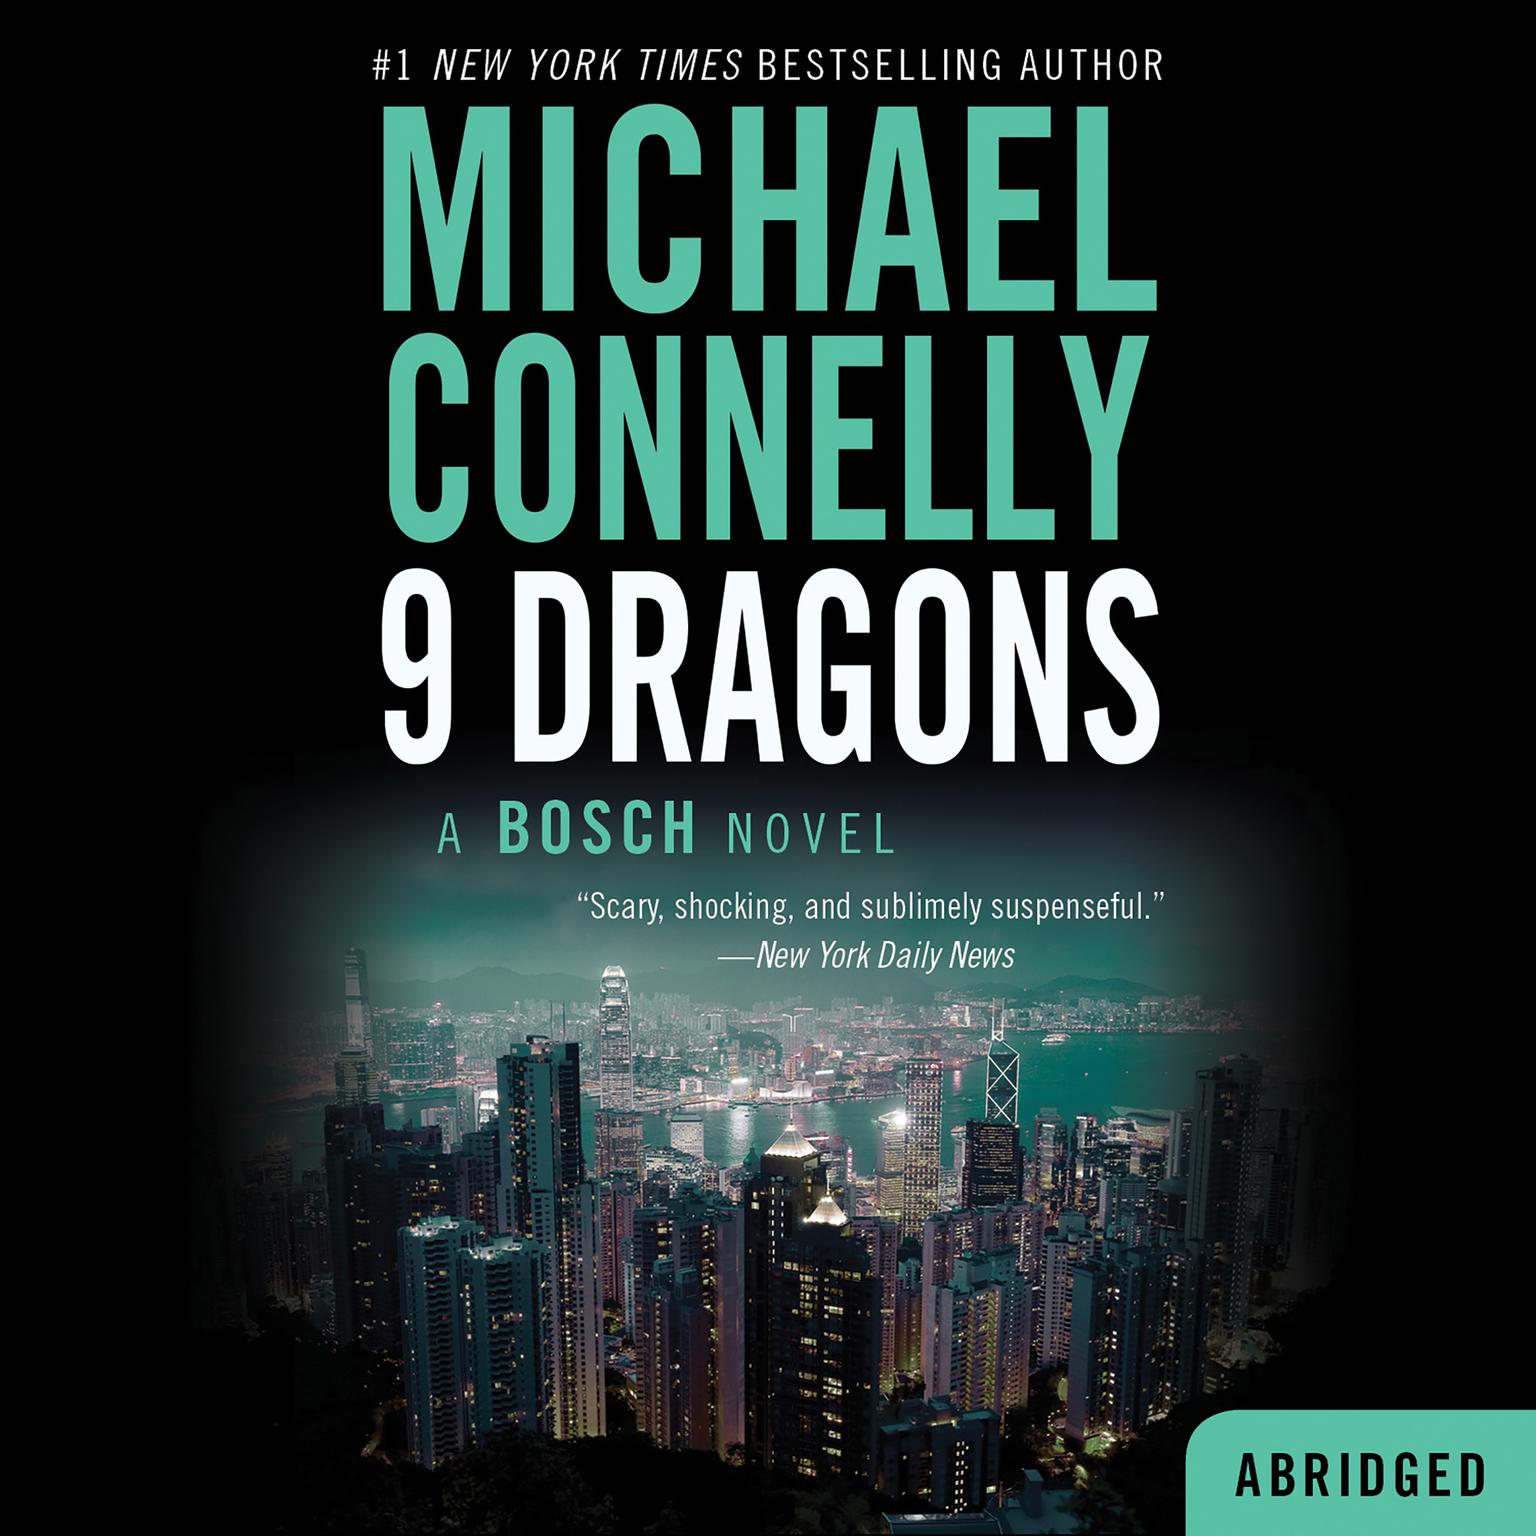 Nine Dragons (Abridged) Audiobook, by Michael Connelly